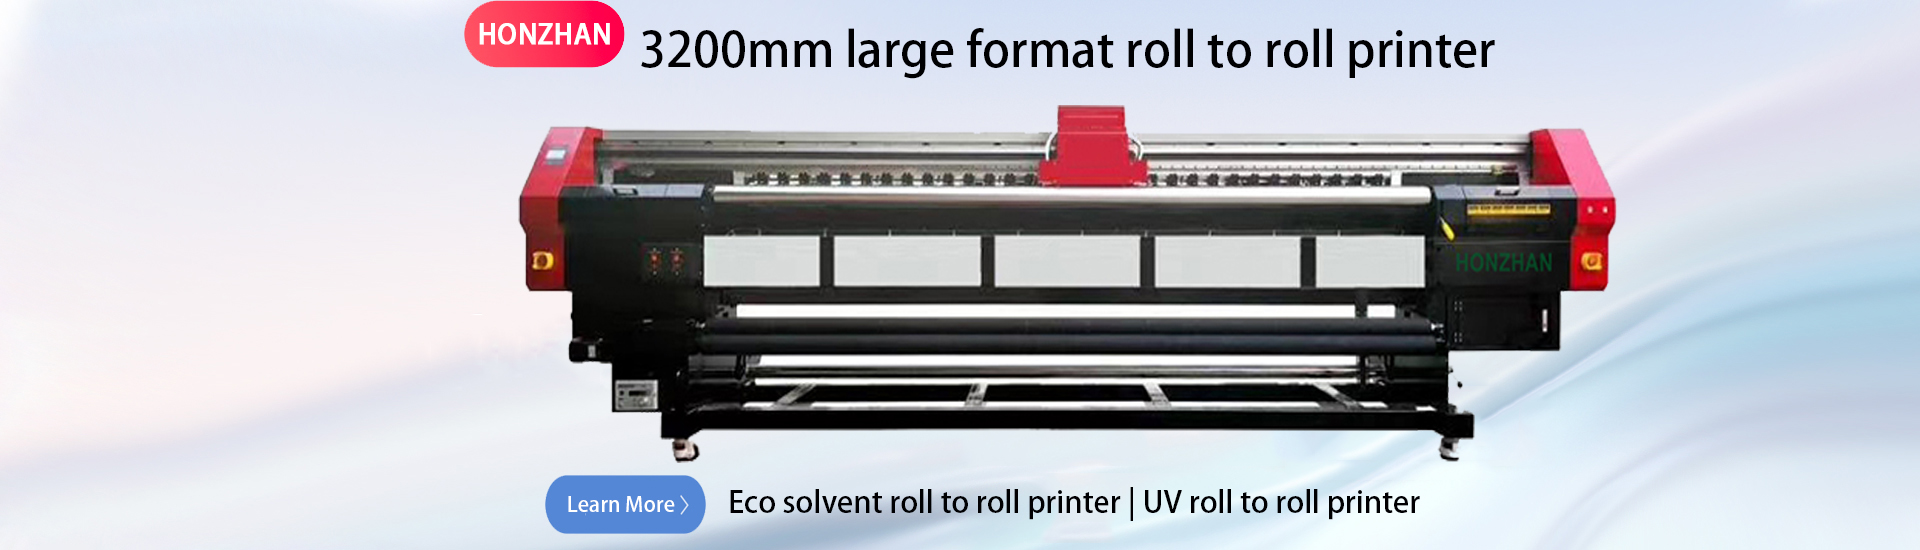 large format roll to roll printer